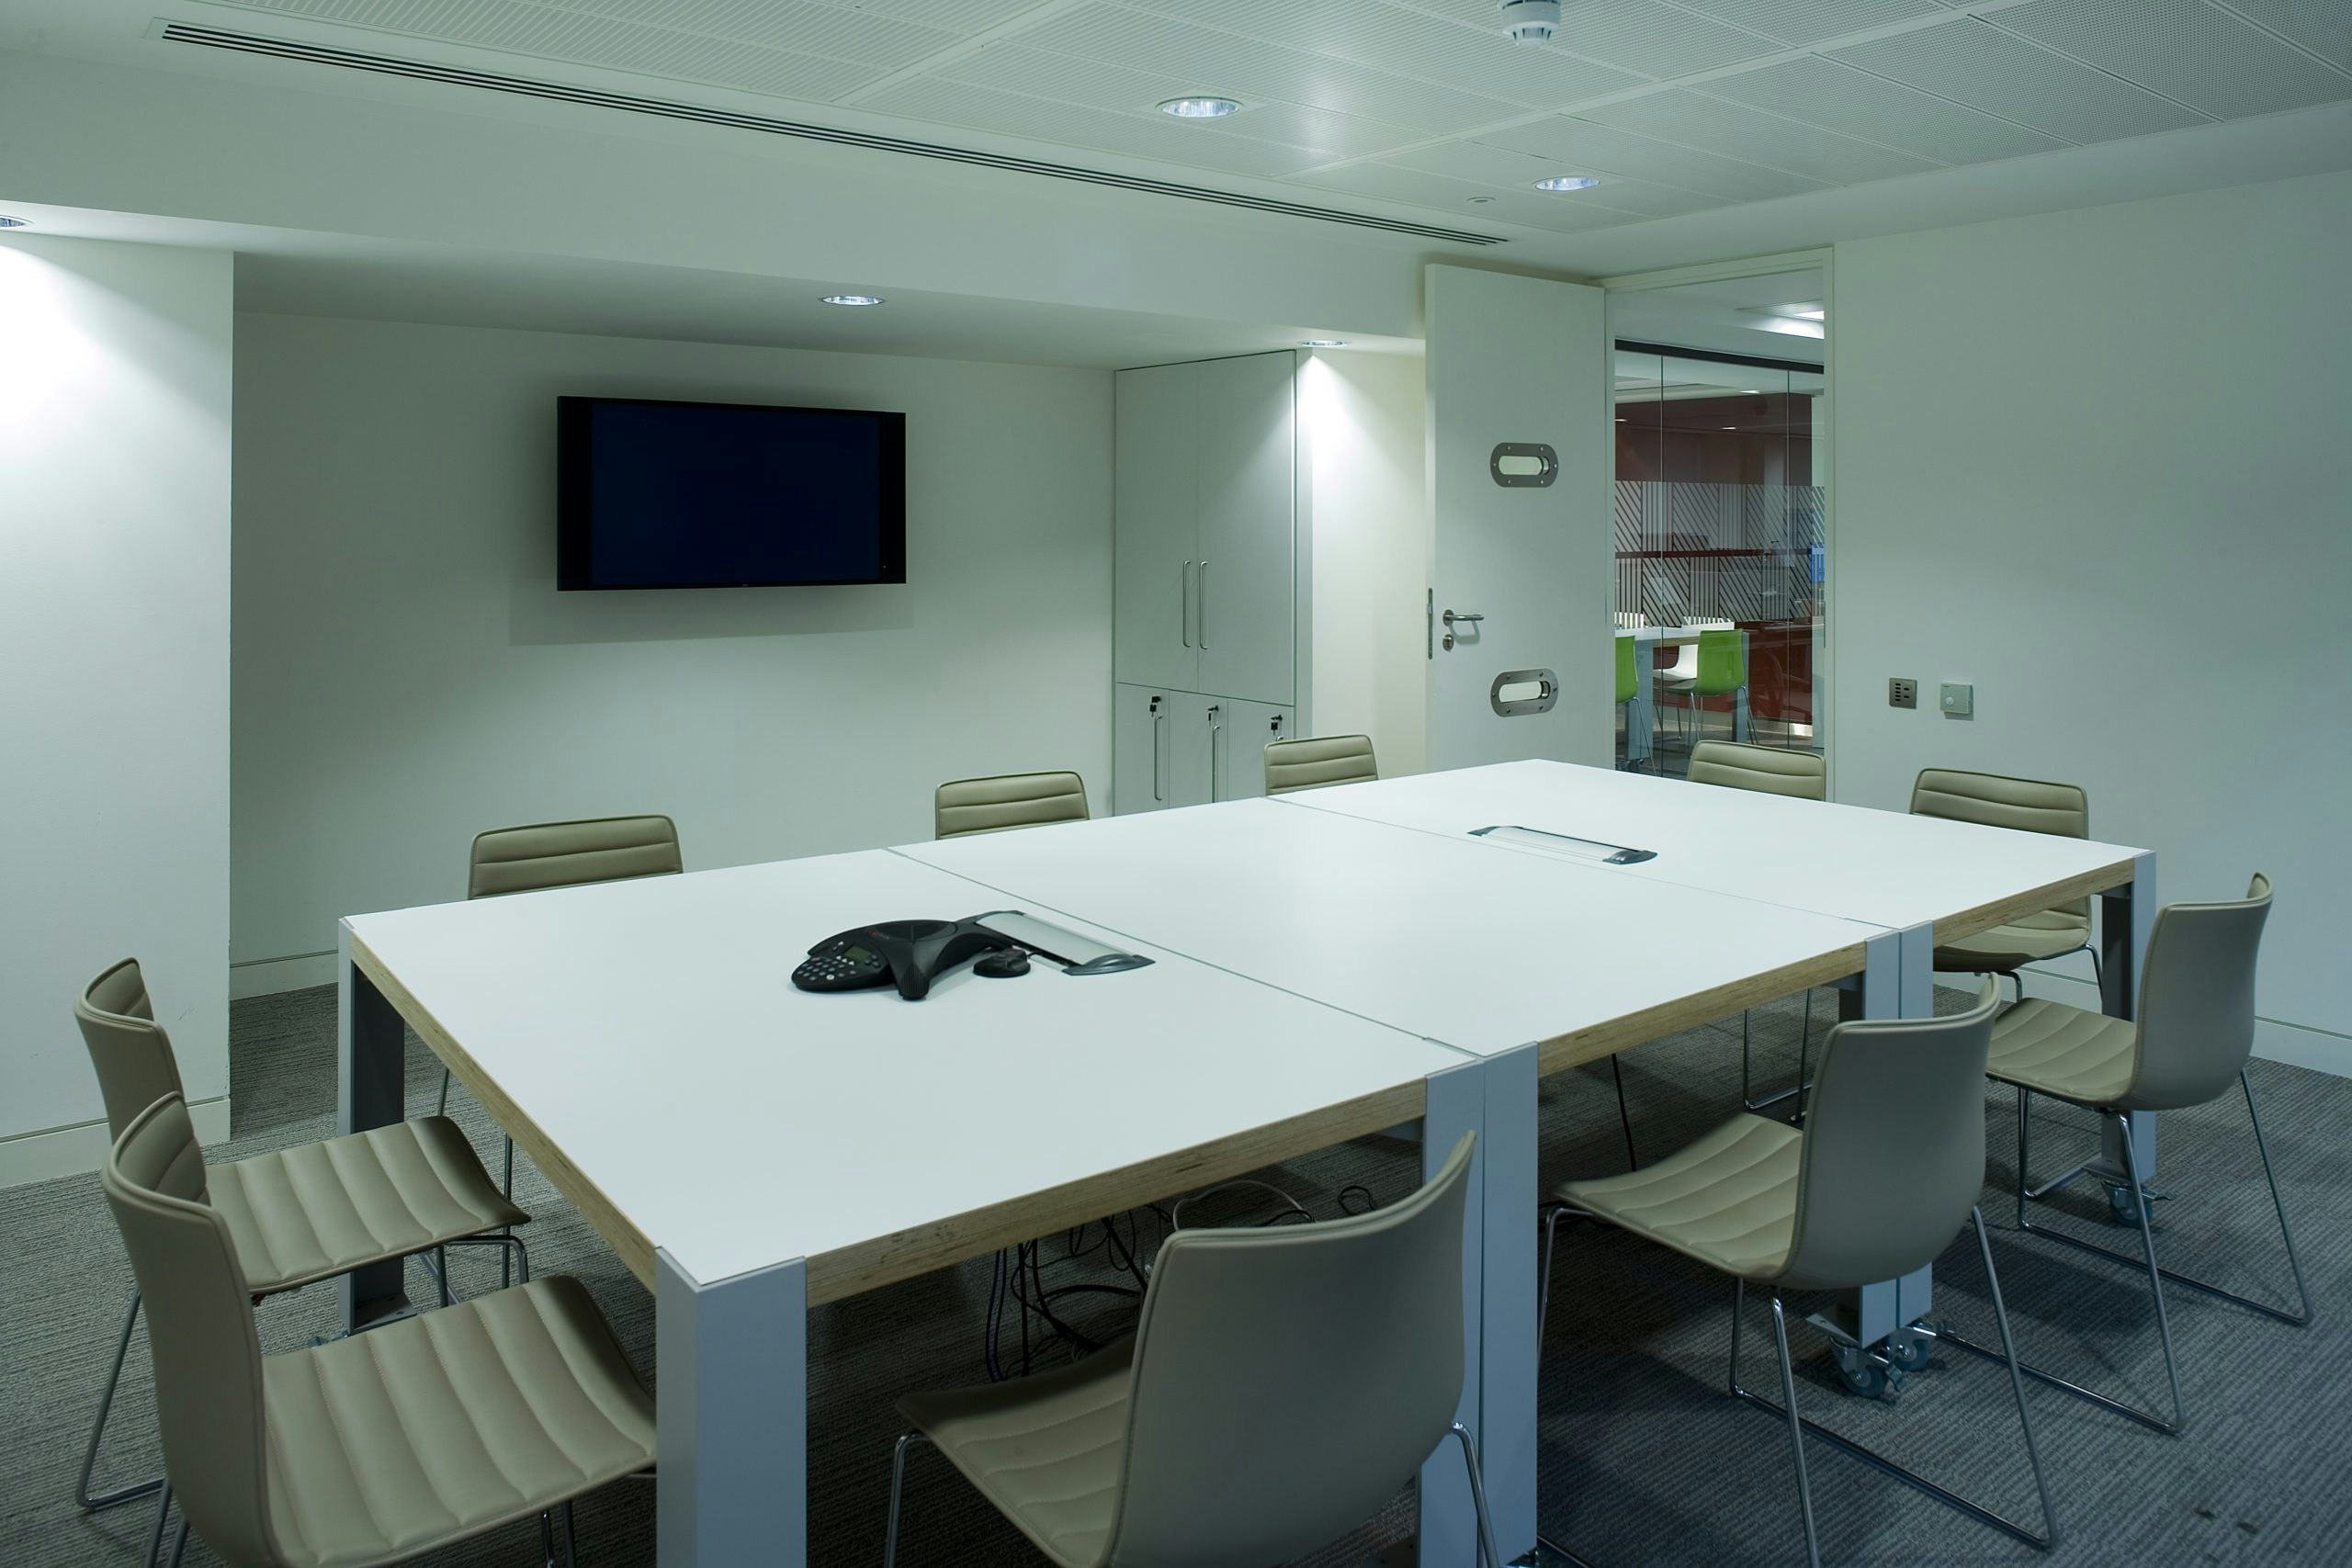 Nokia conference rooms